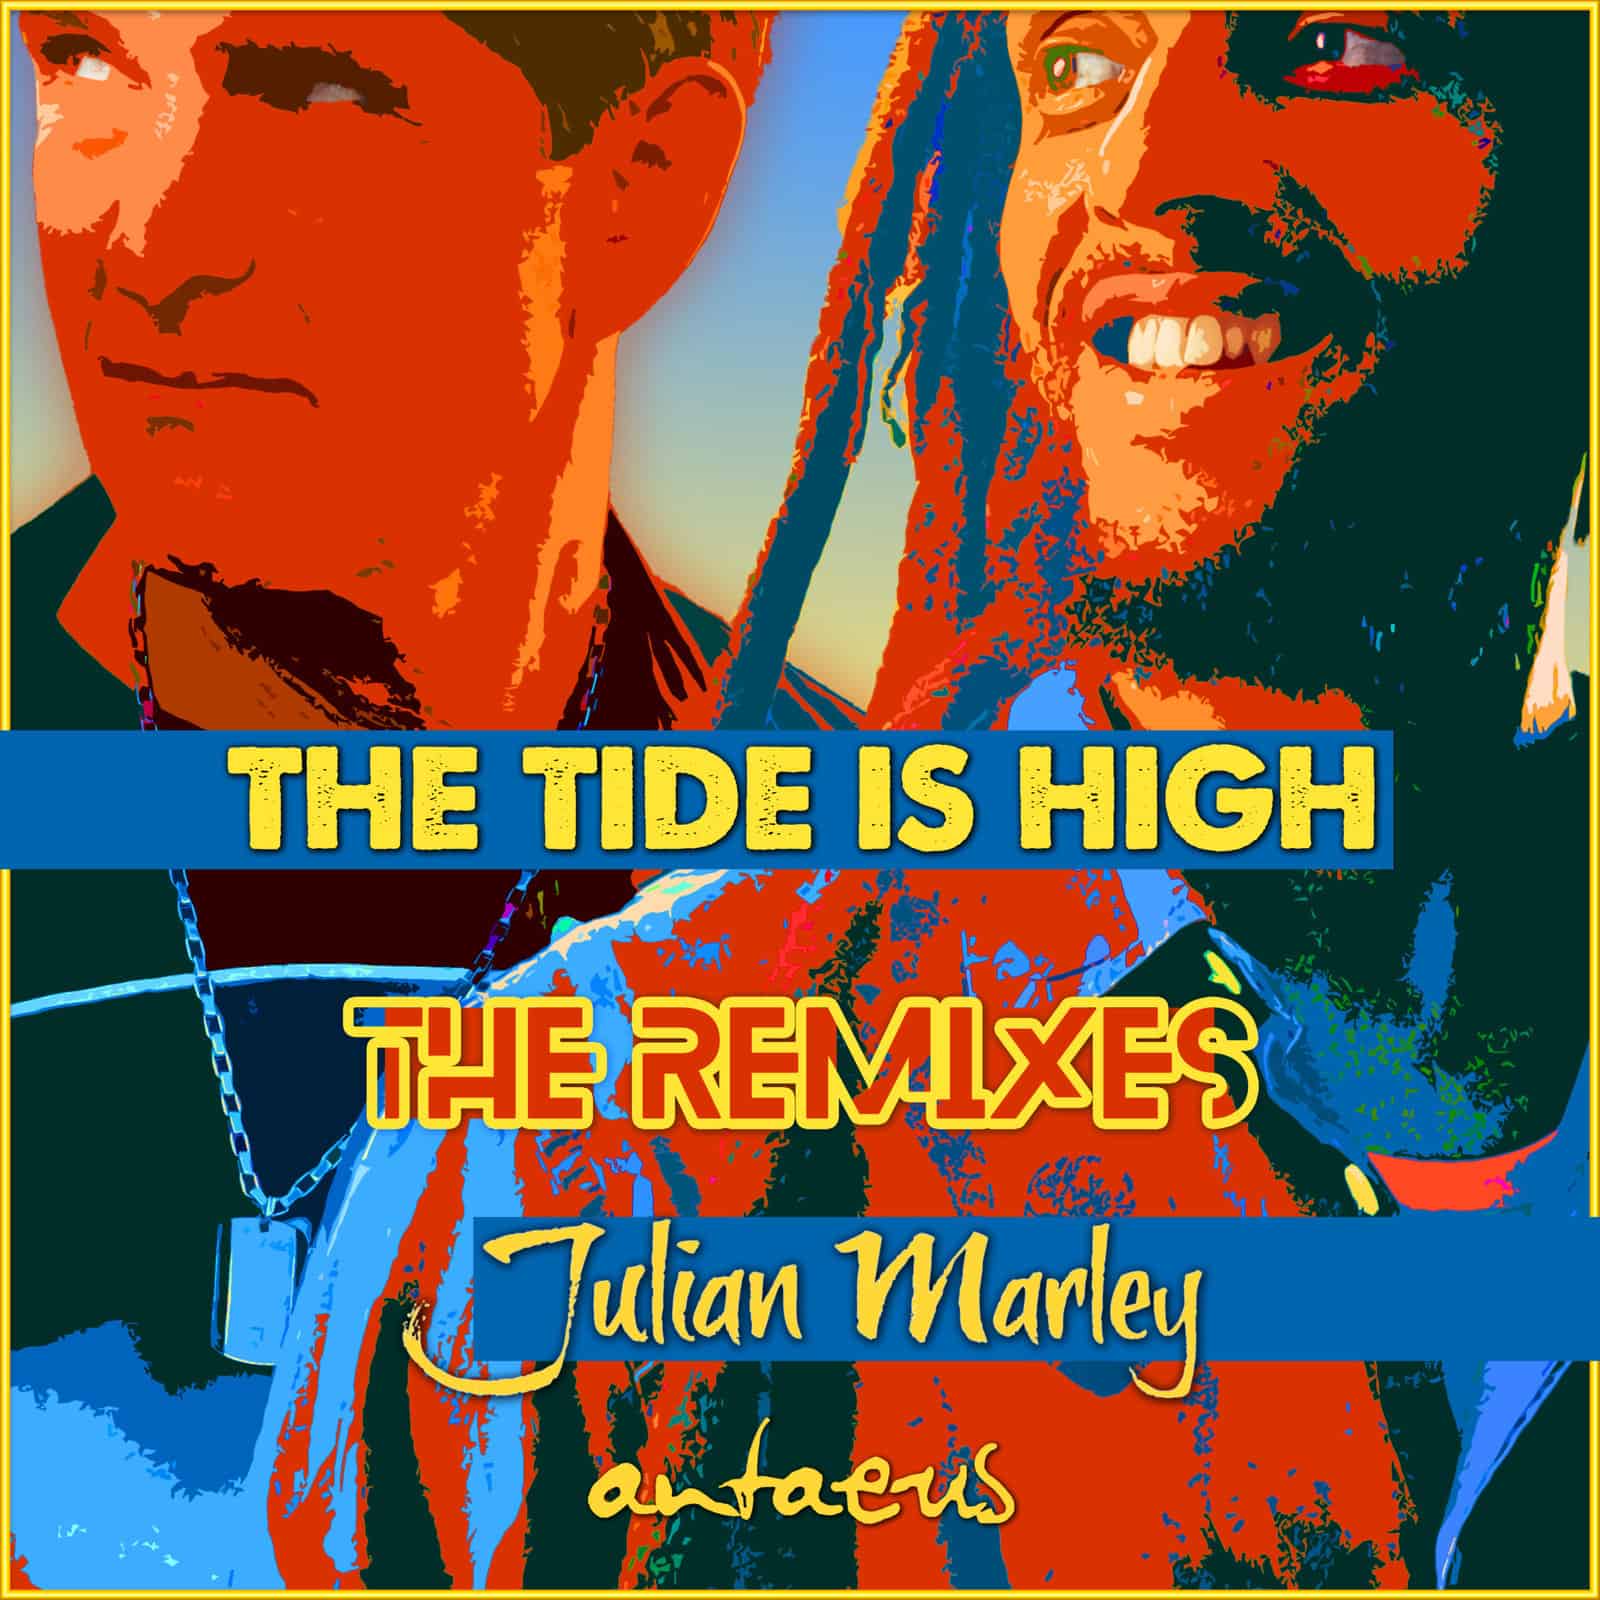 Julian Marley - The Tide Is High Remix EP